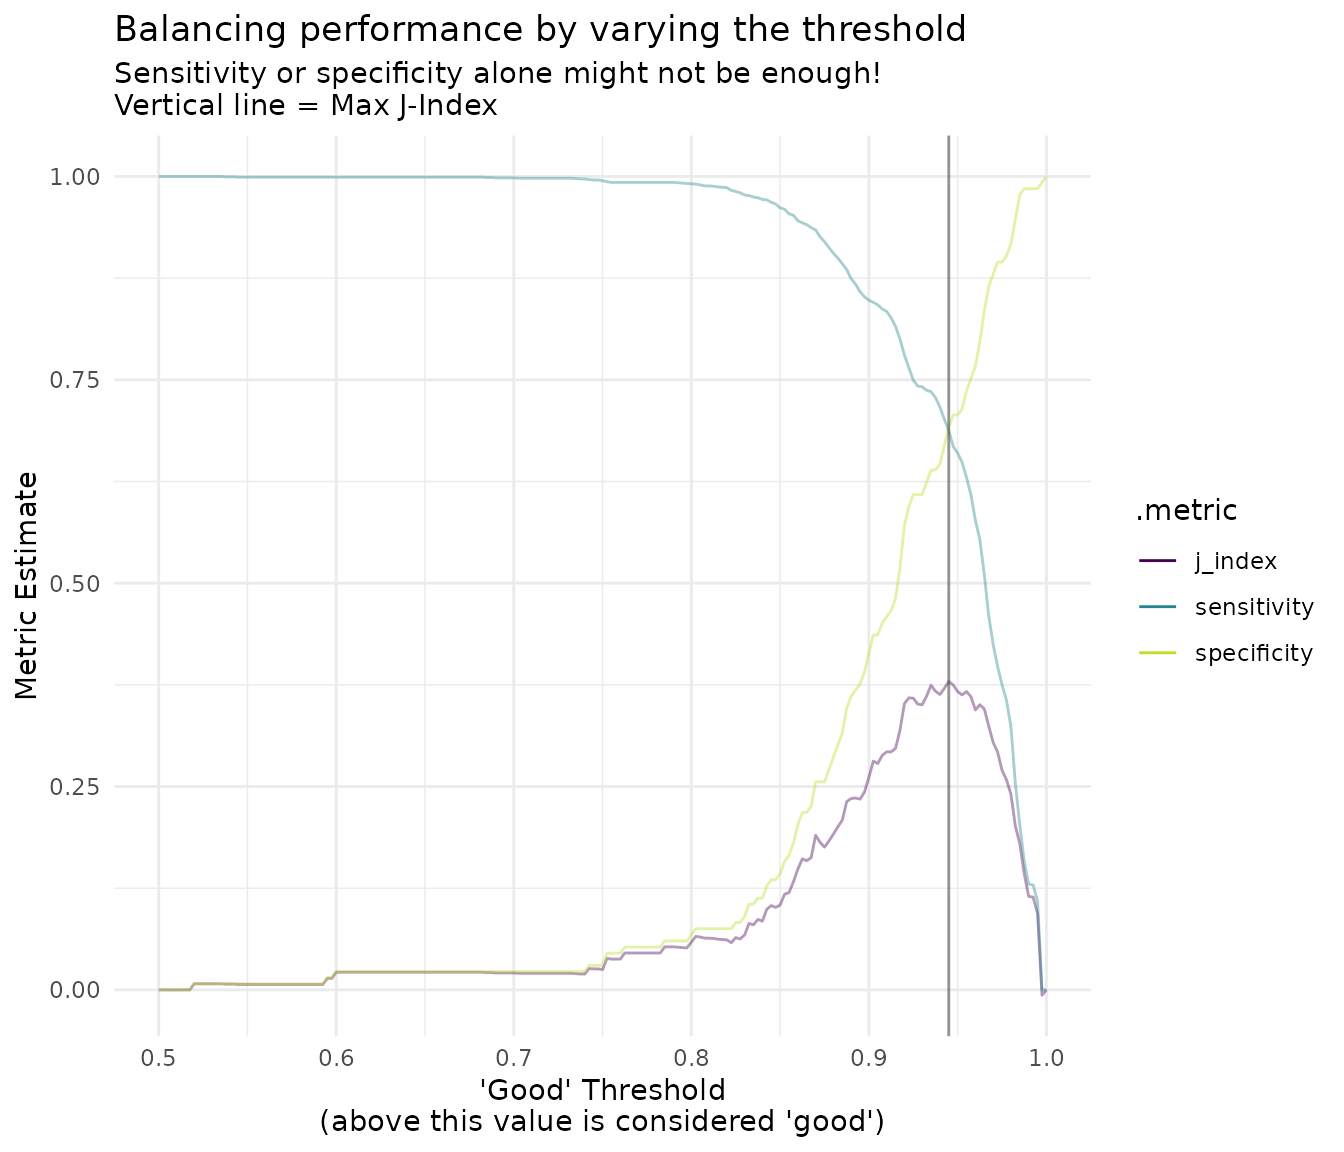 Line chart. `good` threshold along the x-axis, metric estimate along the y-axis. 3 lines are shown for the following three metrics; j_index, sens, and spec. A vertical line is spaced at x = 0.945. The range on the x-axis is 0.5 to 1, and 0 to 1 on the y-axis. Reading from the left, sens starts at y = 1, starts decreasing around x = 0.8, ending at 0 for x = 1. spec follows the same path but starting at 0 and ending at 1. j_index starts at 0, increases at around 0.8, to a high around 0.945. Sens and spec cross each other at x = 0.945.